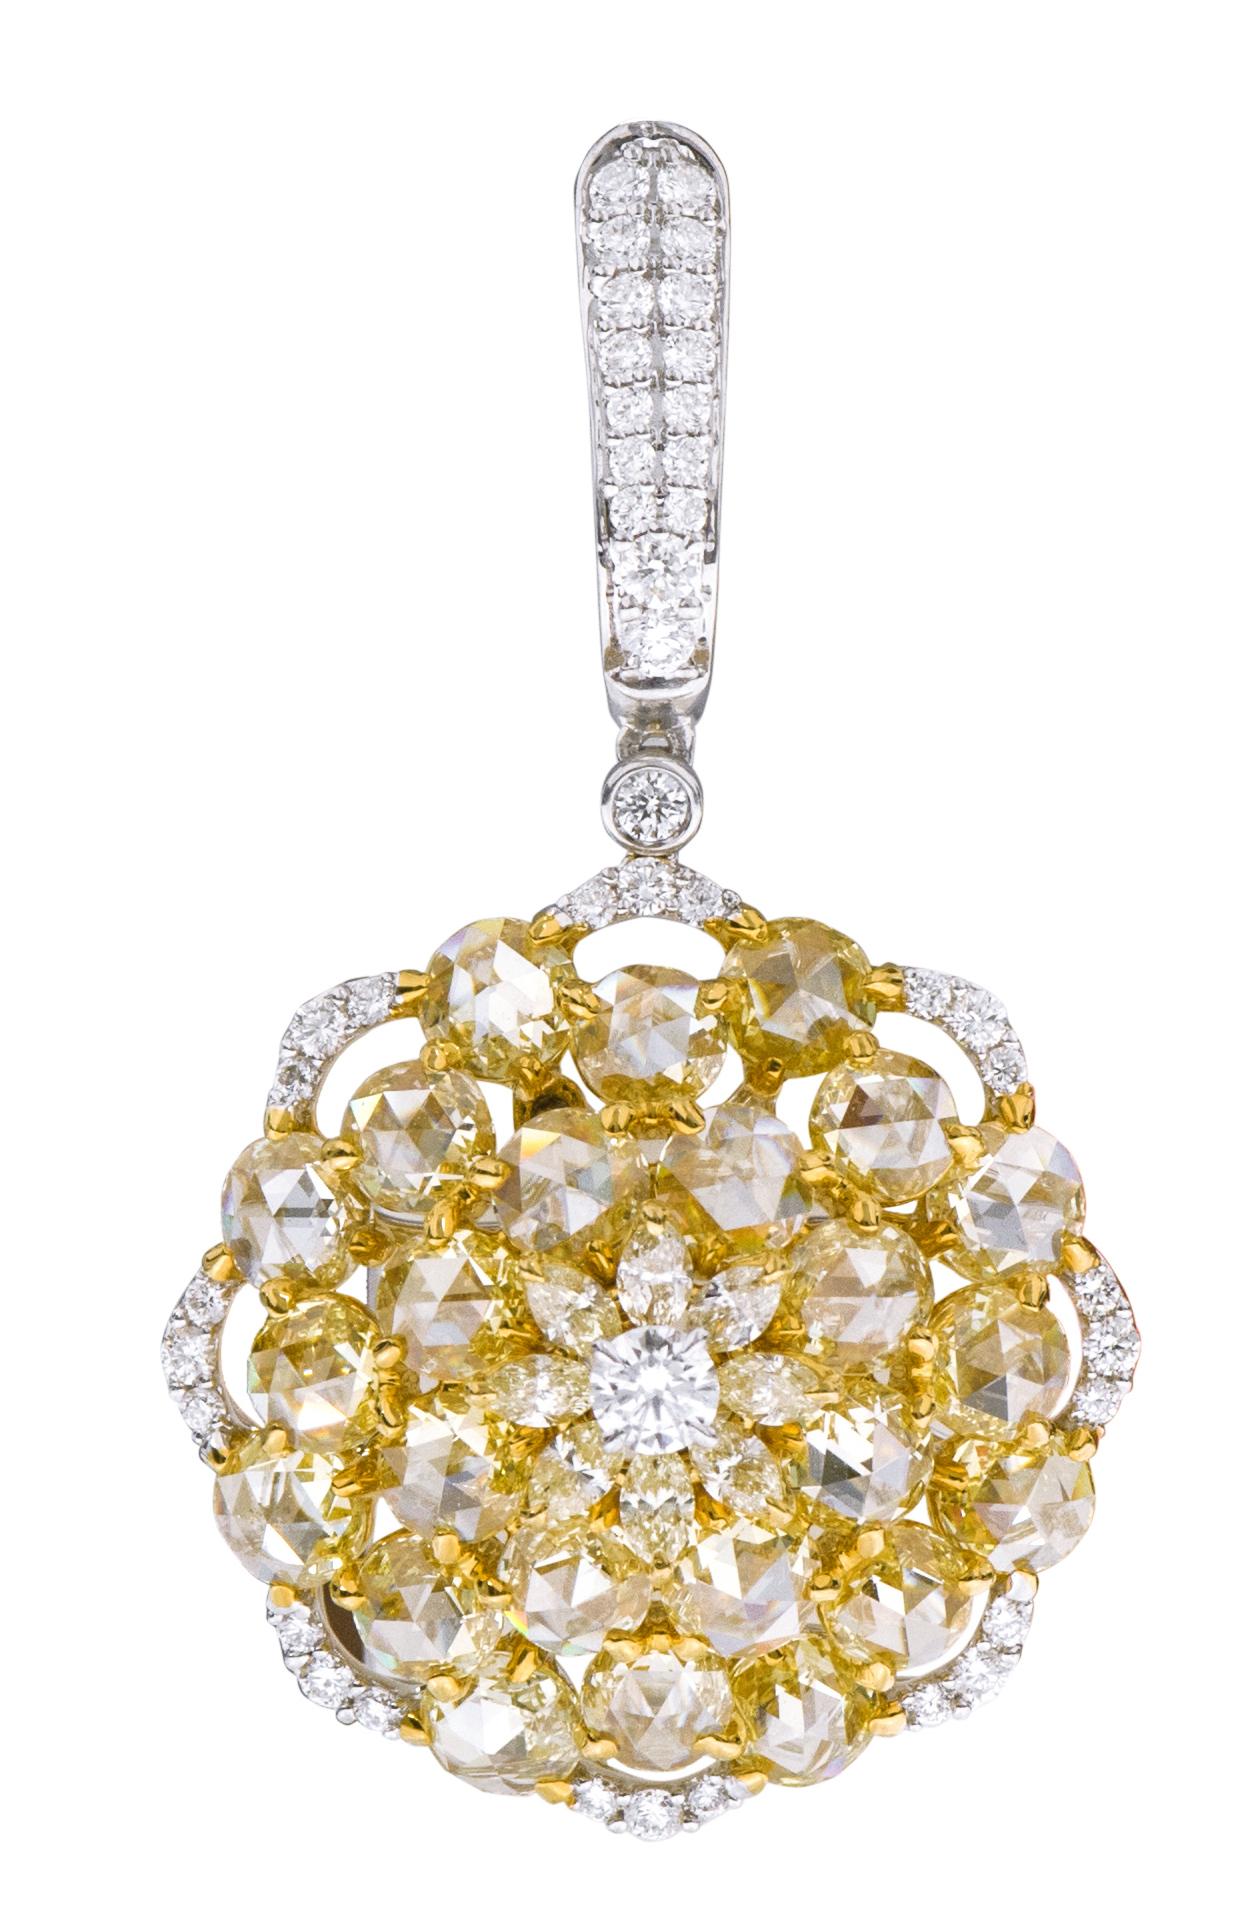 18 Karat Gold 8.69 Carat Yellow and White Diamond Drop Cocktail Earrings For Sale 1